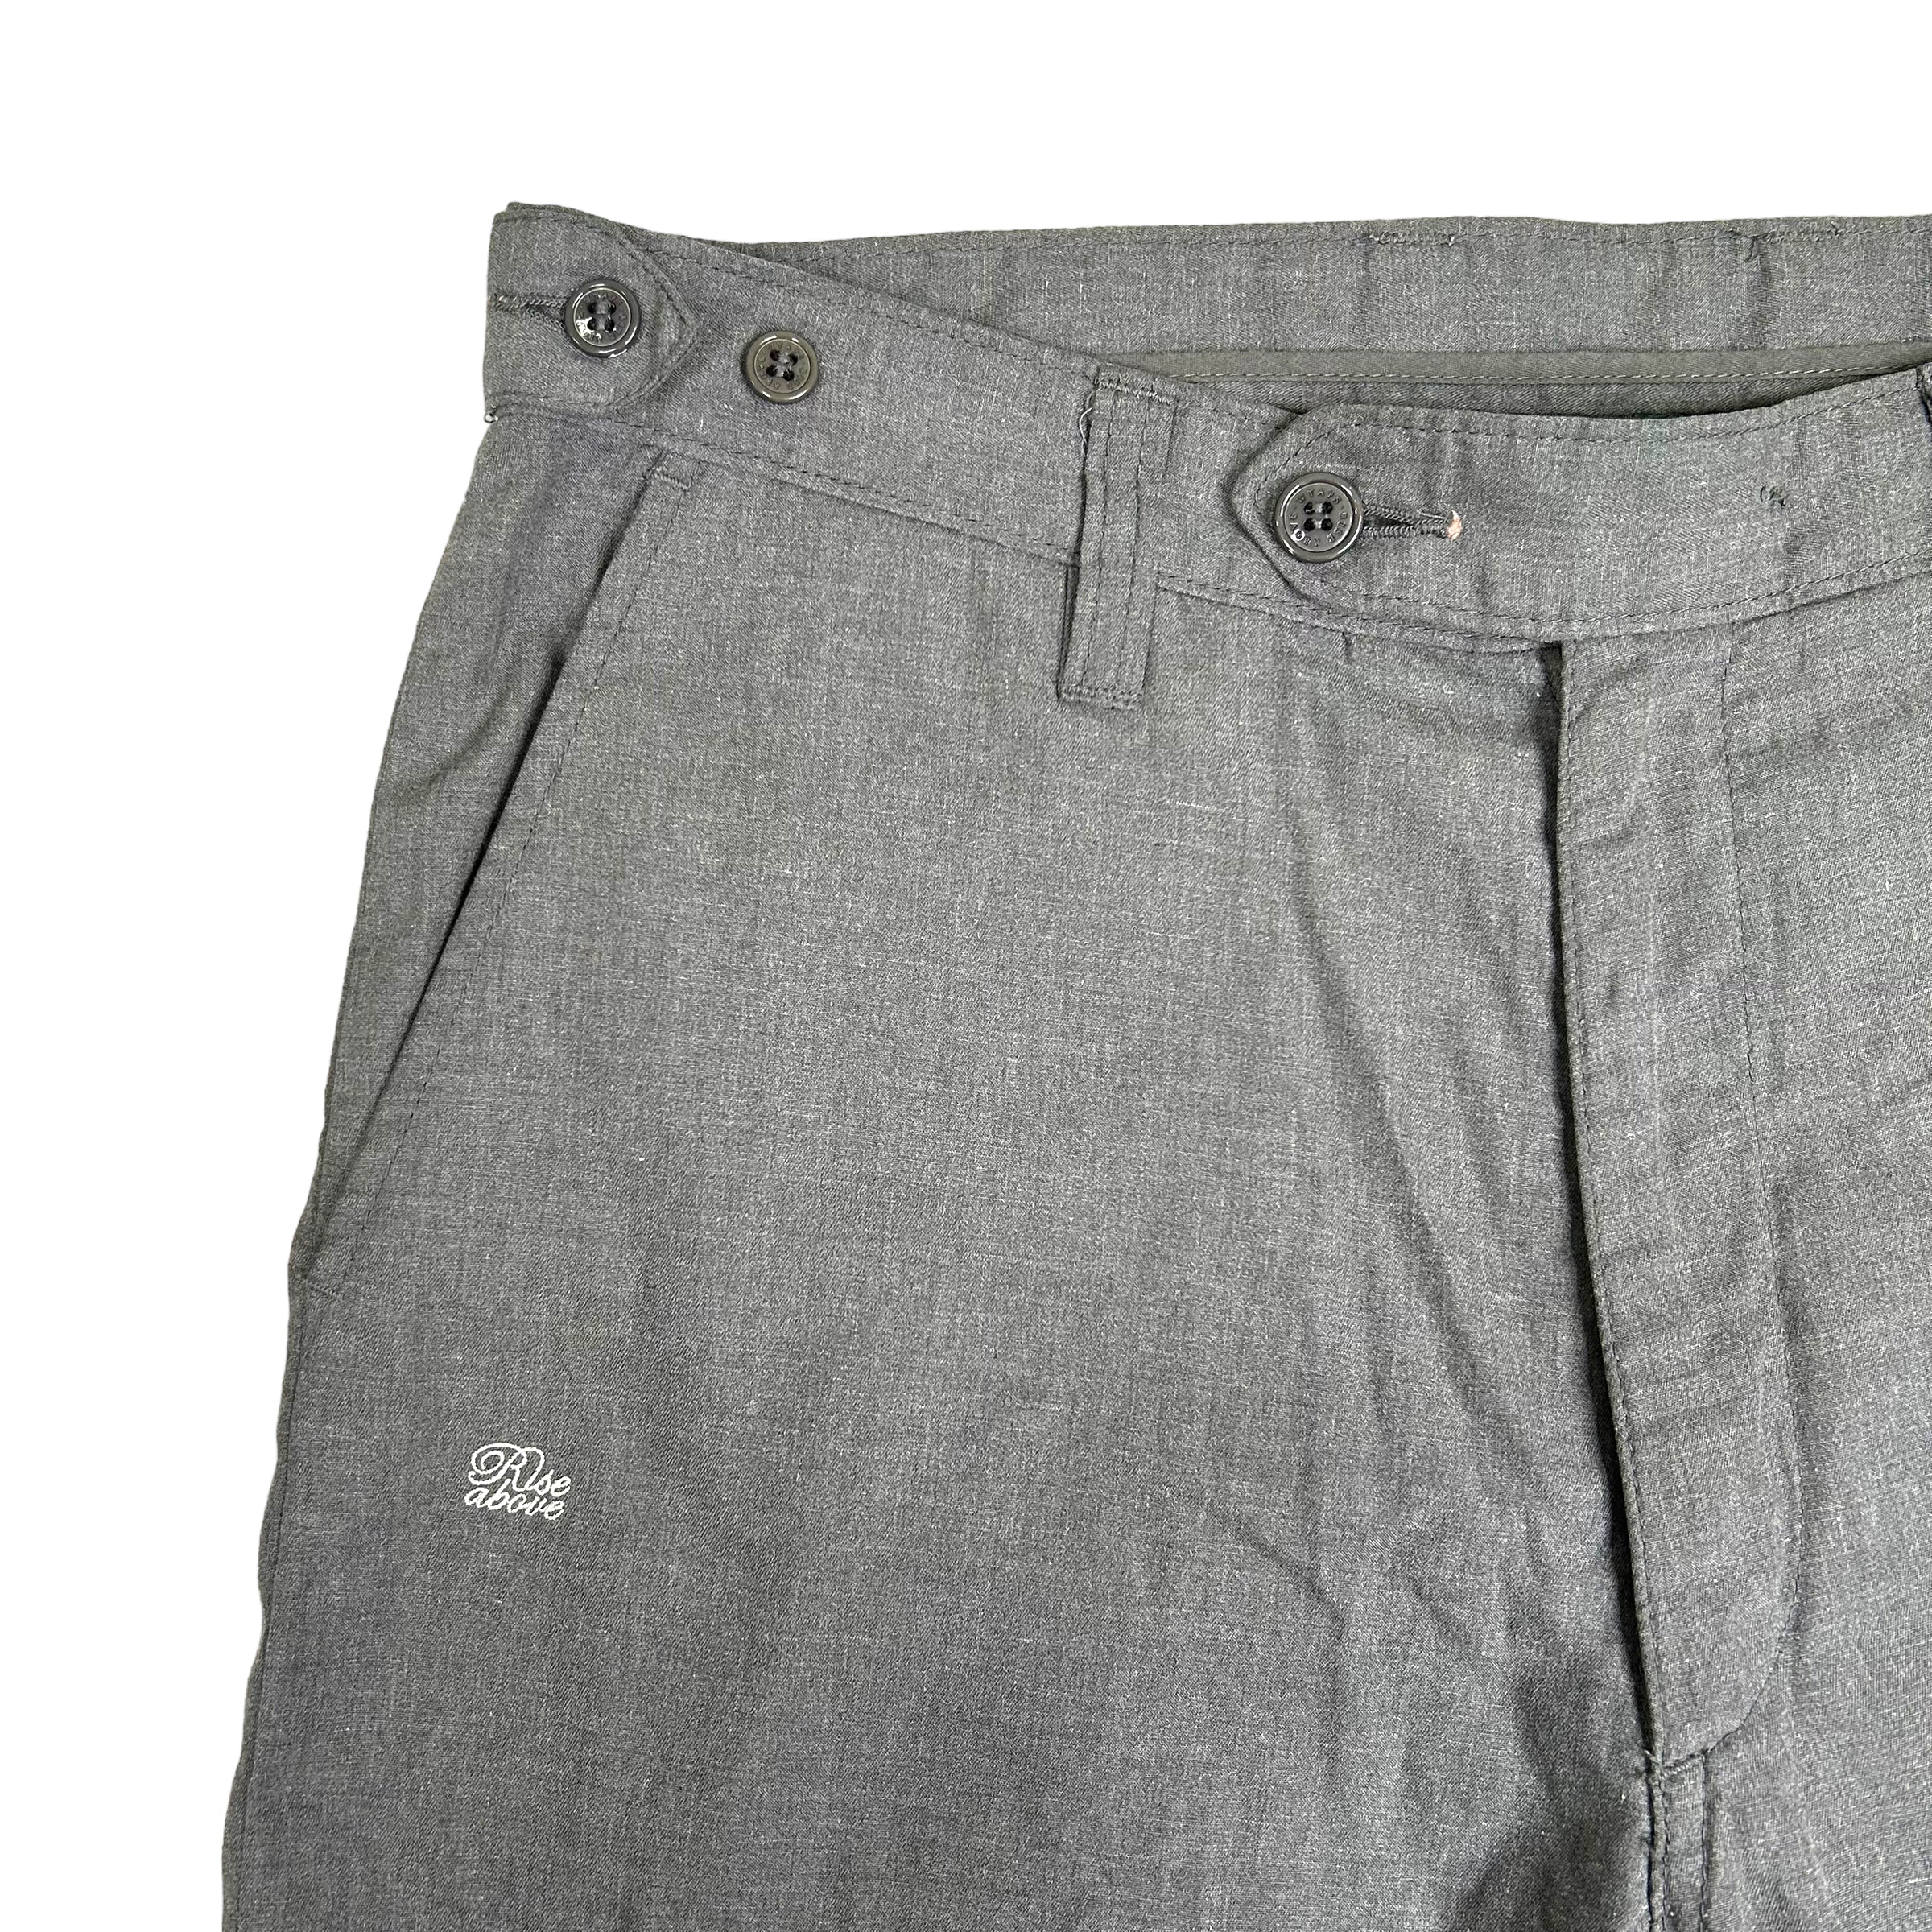 WTAPS TWO TONE "RISE ABOVE" TROUSERS